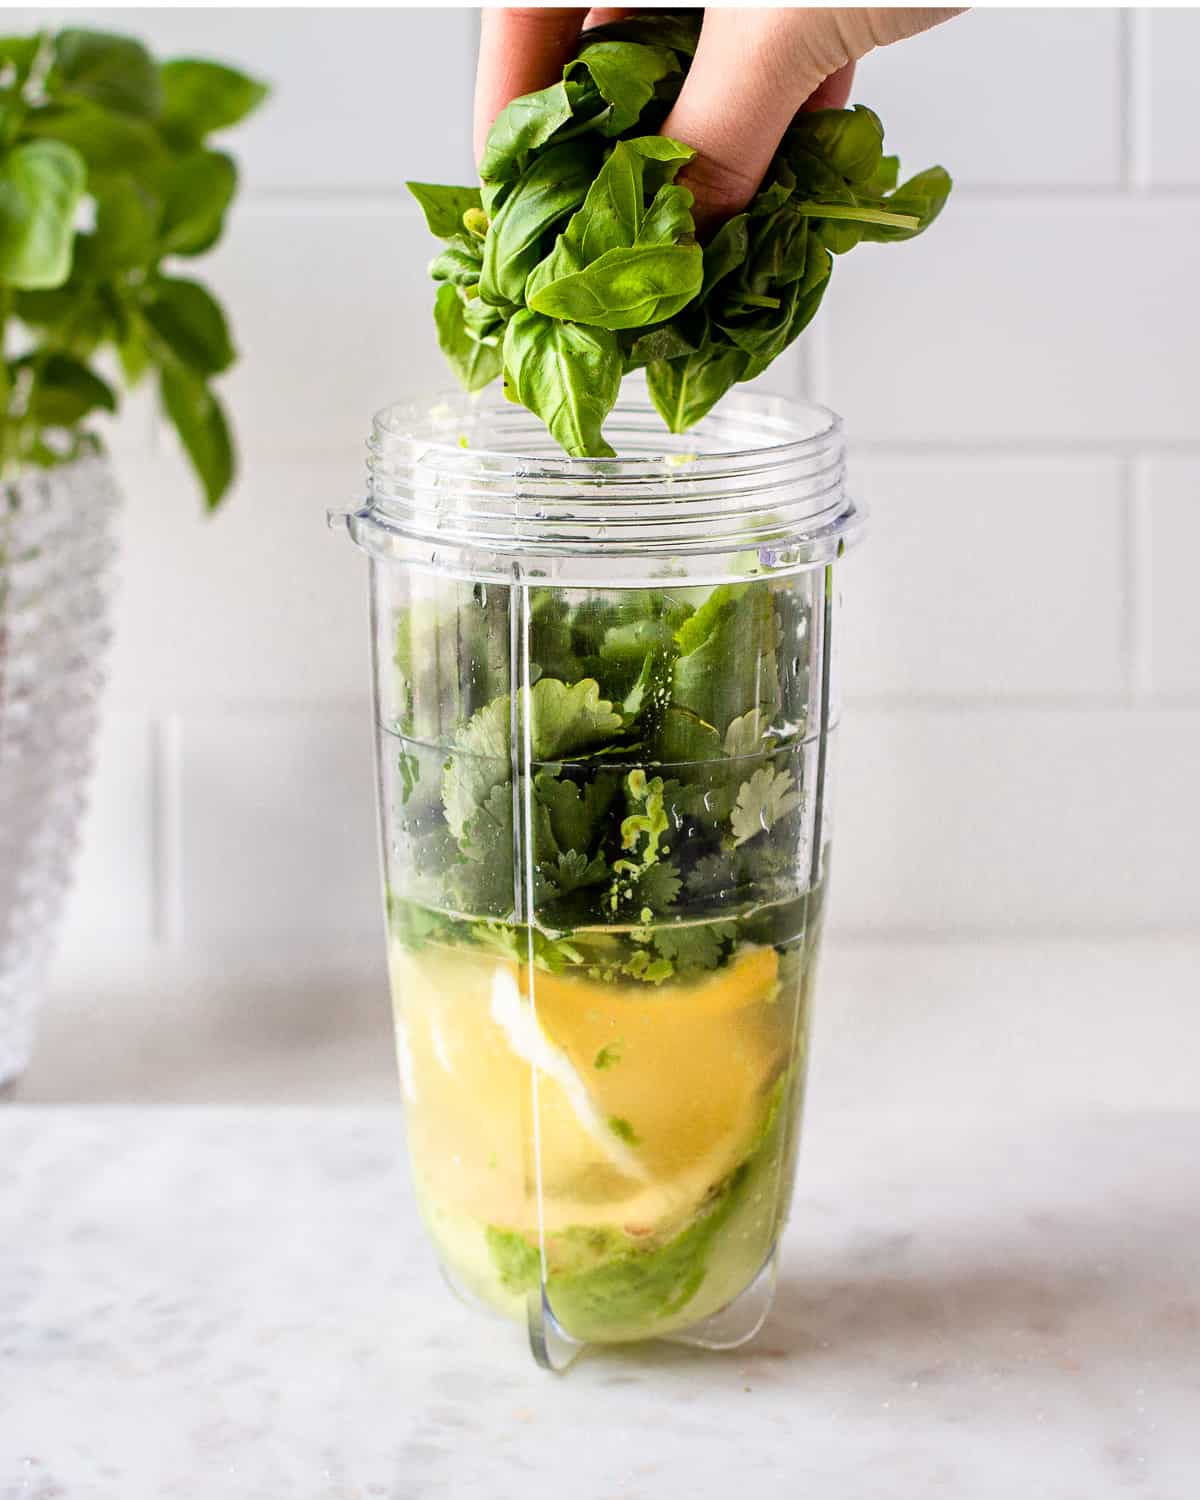 Hand adding fresh basil to a blender jar with lemon, cilantro, and oil.